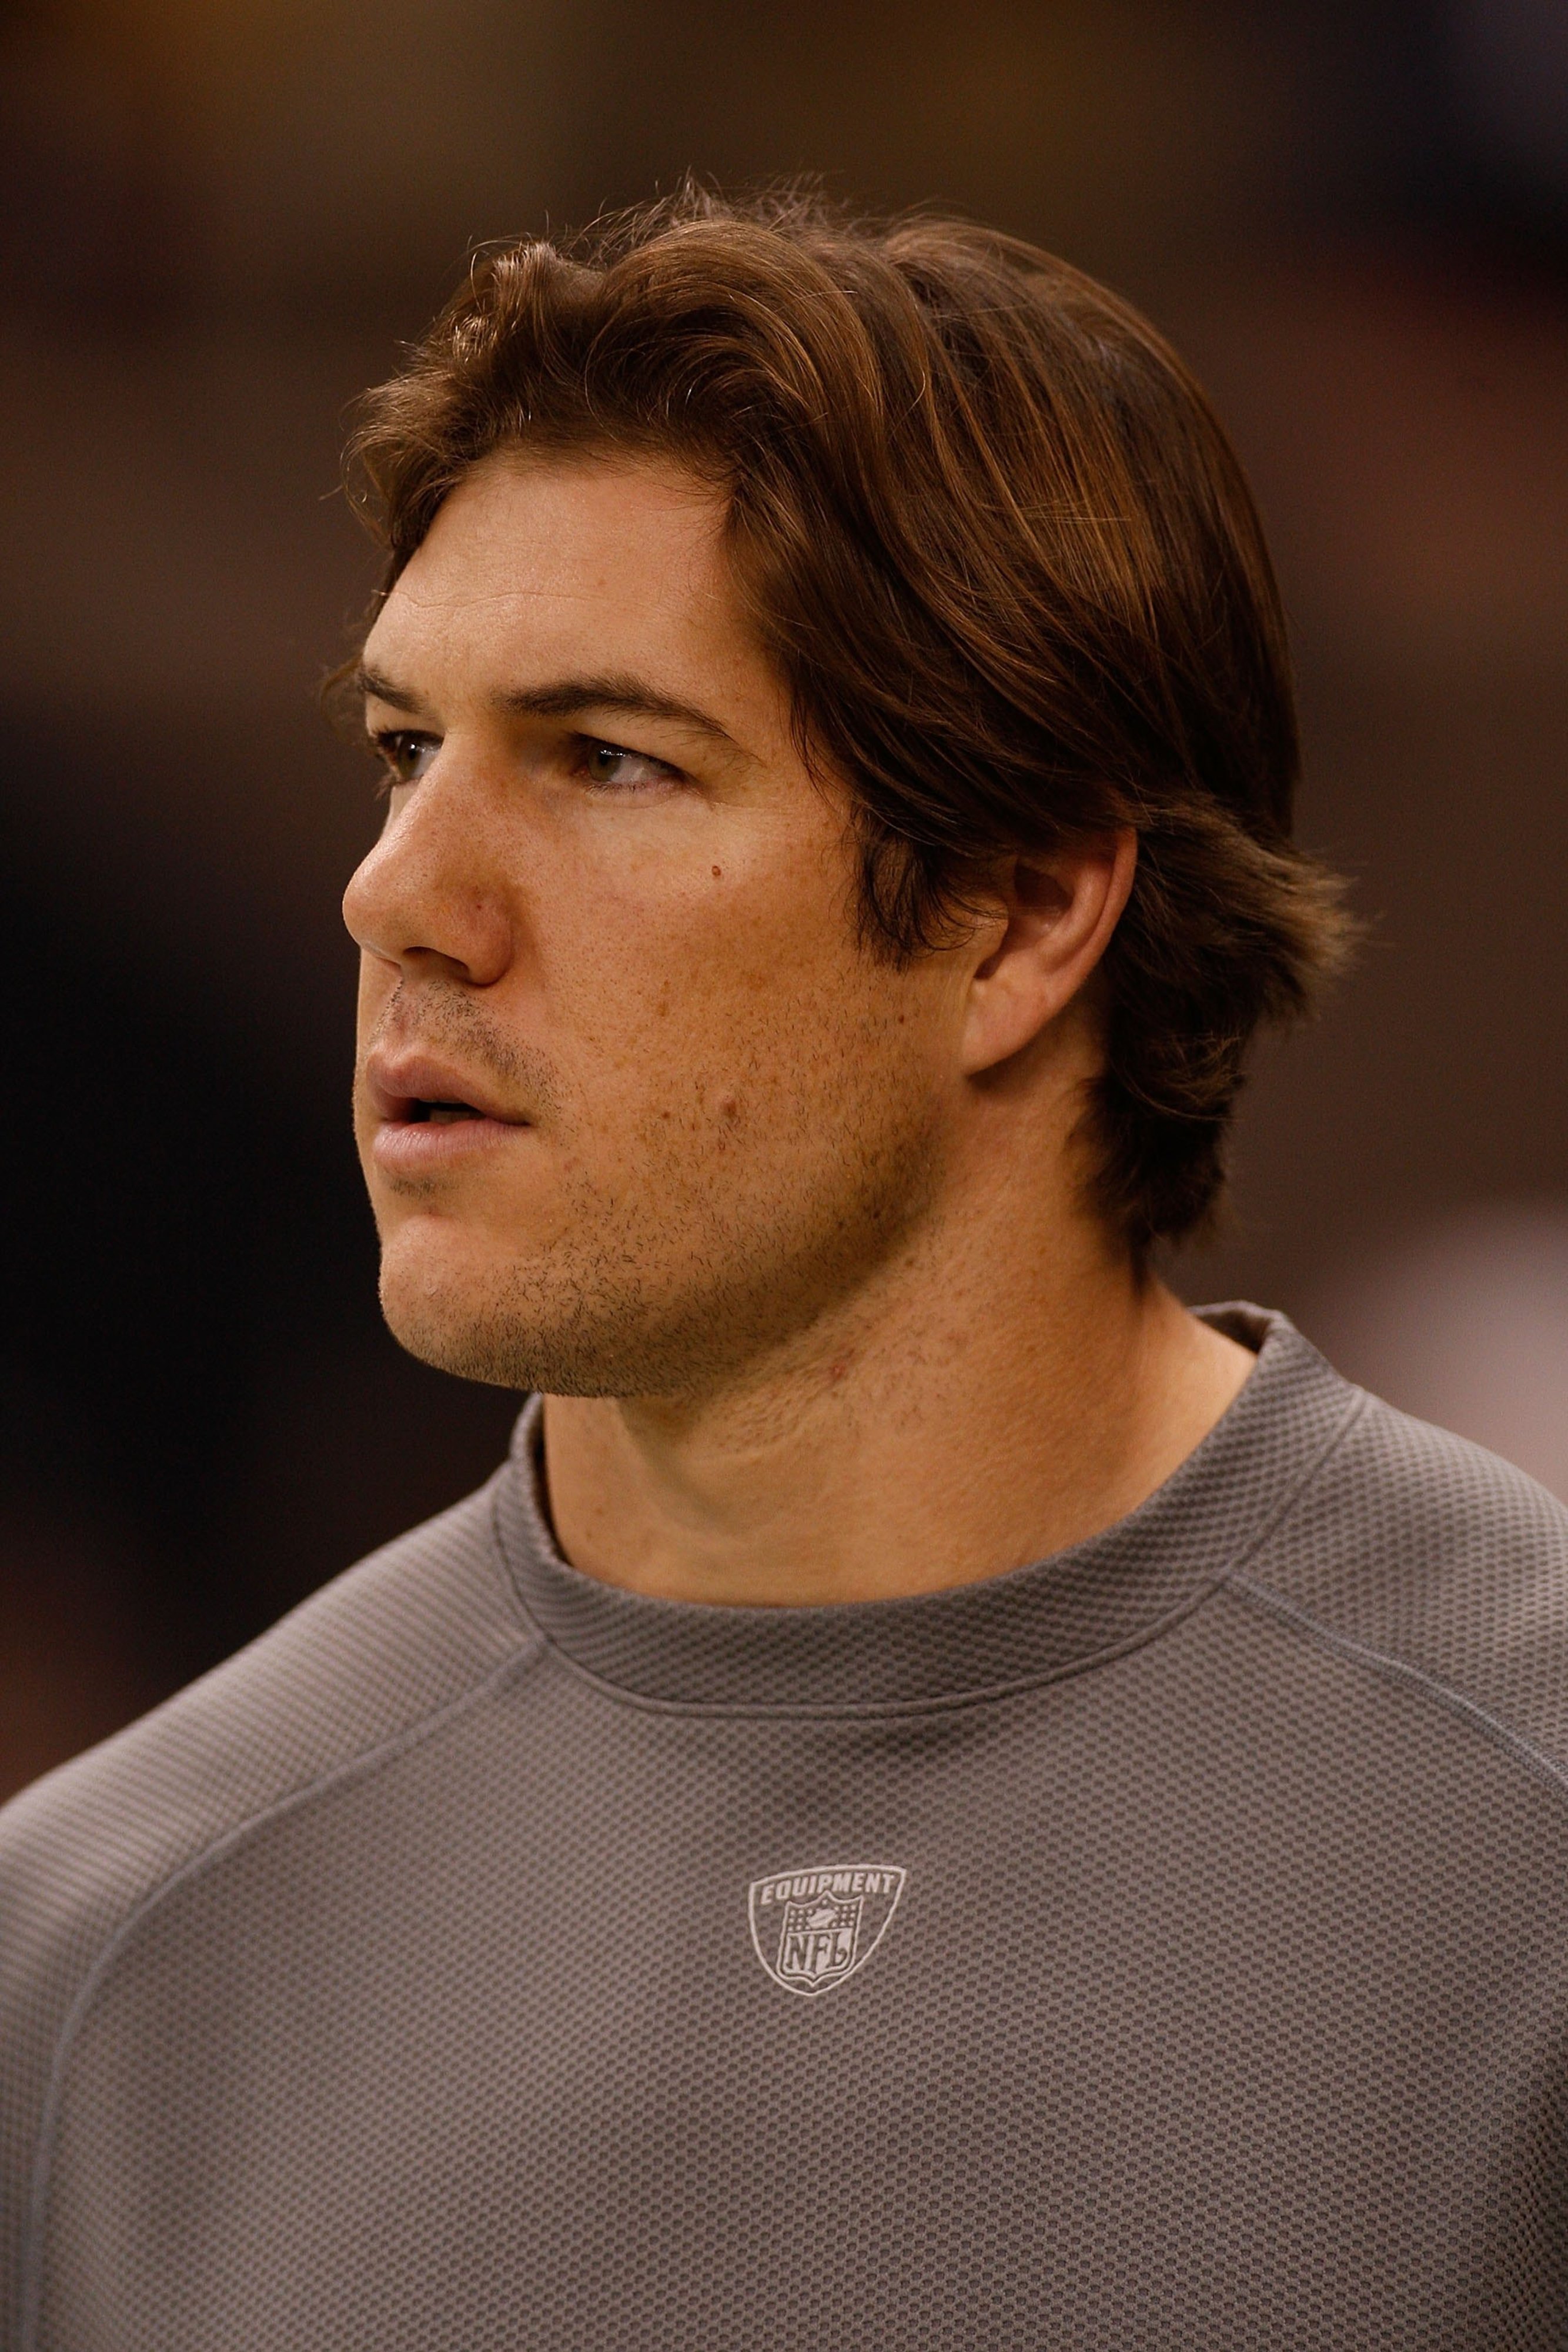 Is Scott Fujita going to get let off the hook when the NFL's hypocrasy is exposed?